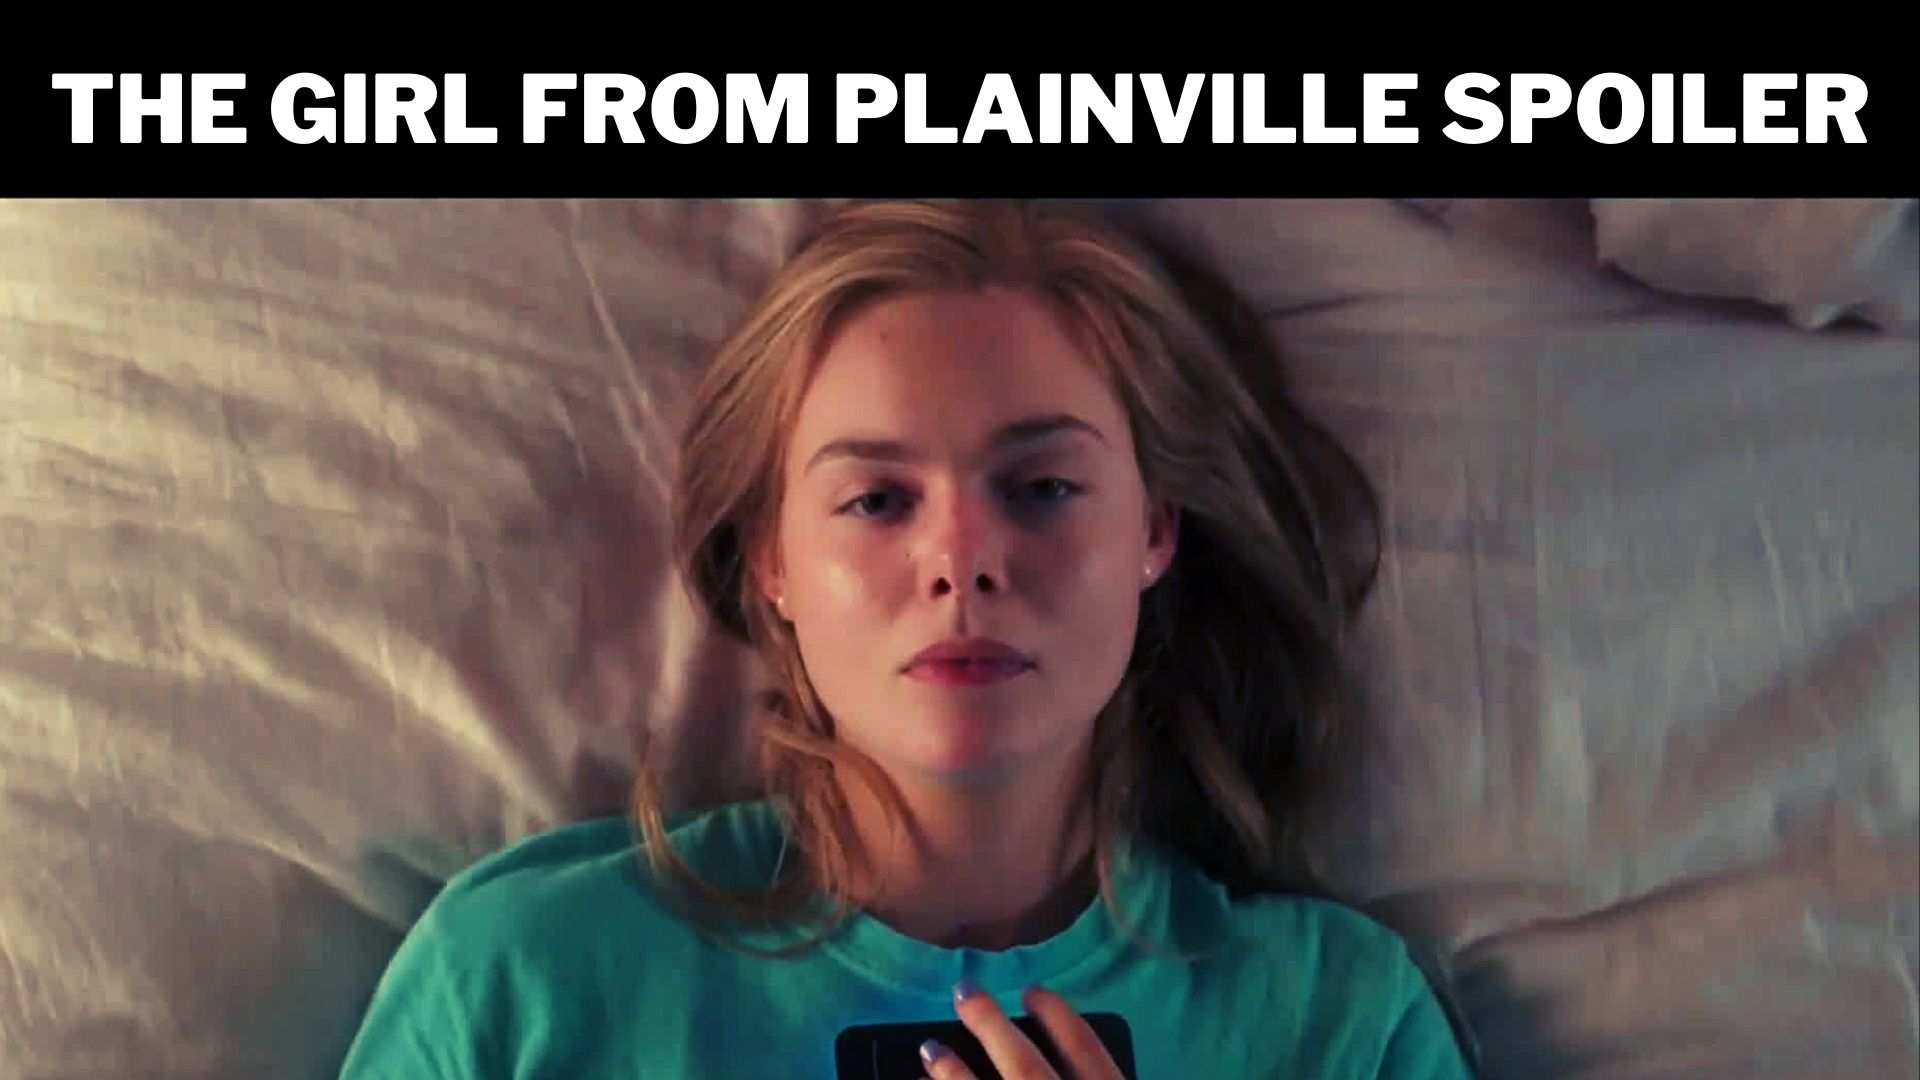 The Girl from Plainville Spoiler Wallpaper and images